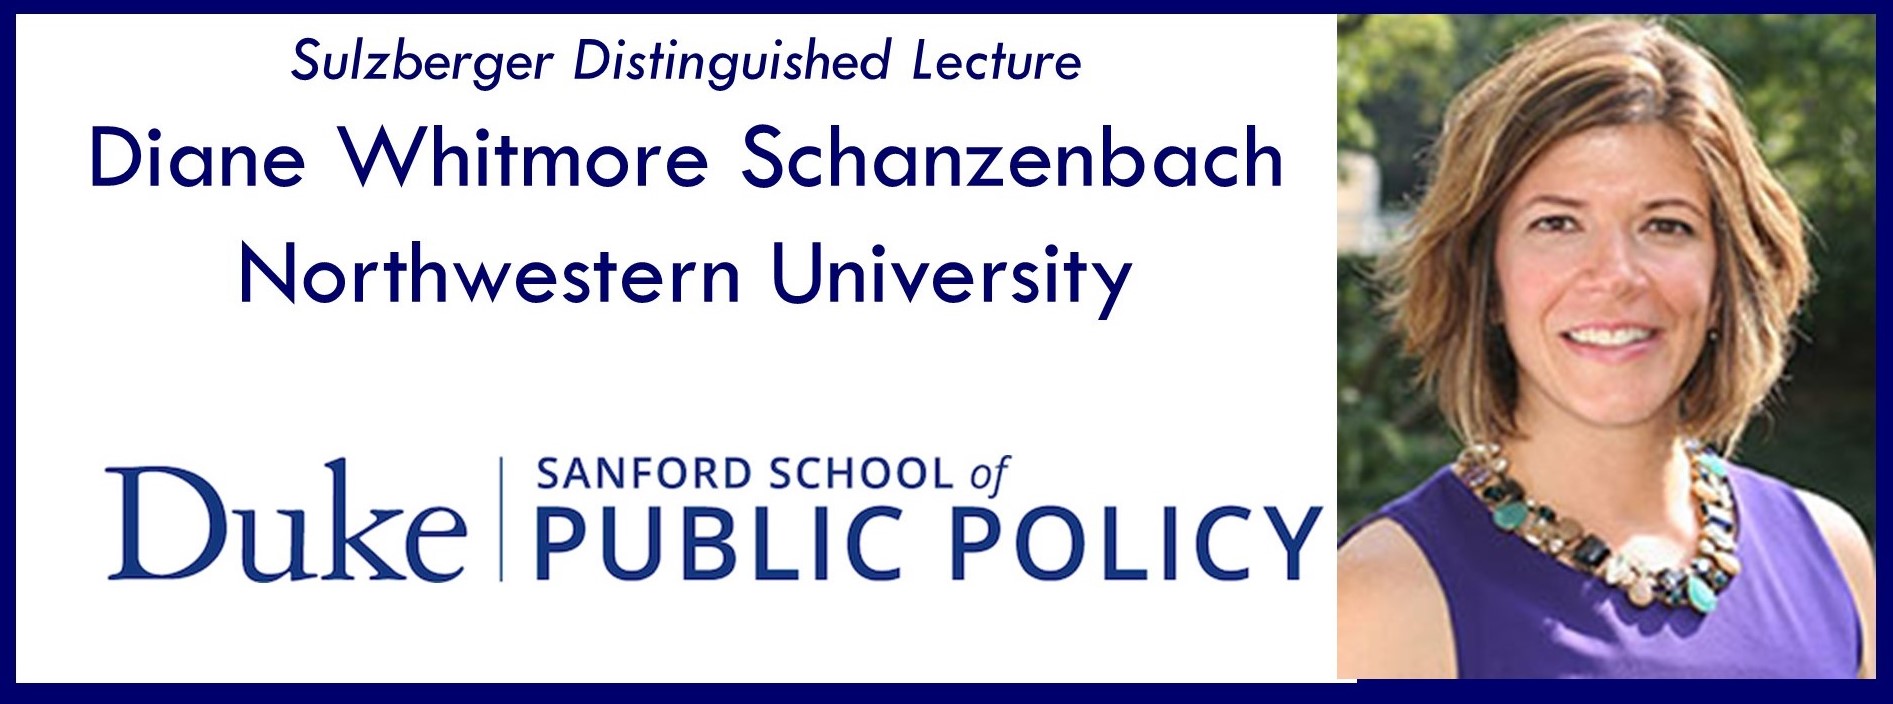 The Sulzberger Distinguished Lecture Presents Diane Whitmore Schanzenbach - "How We are Underinvesting in Kids (and what we can do about it)"